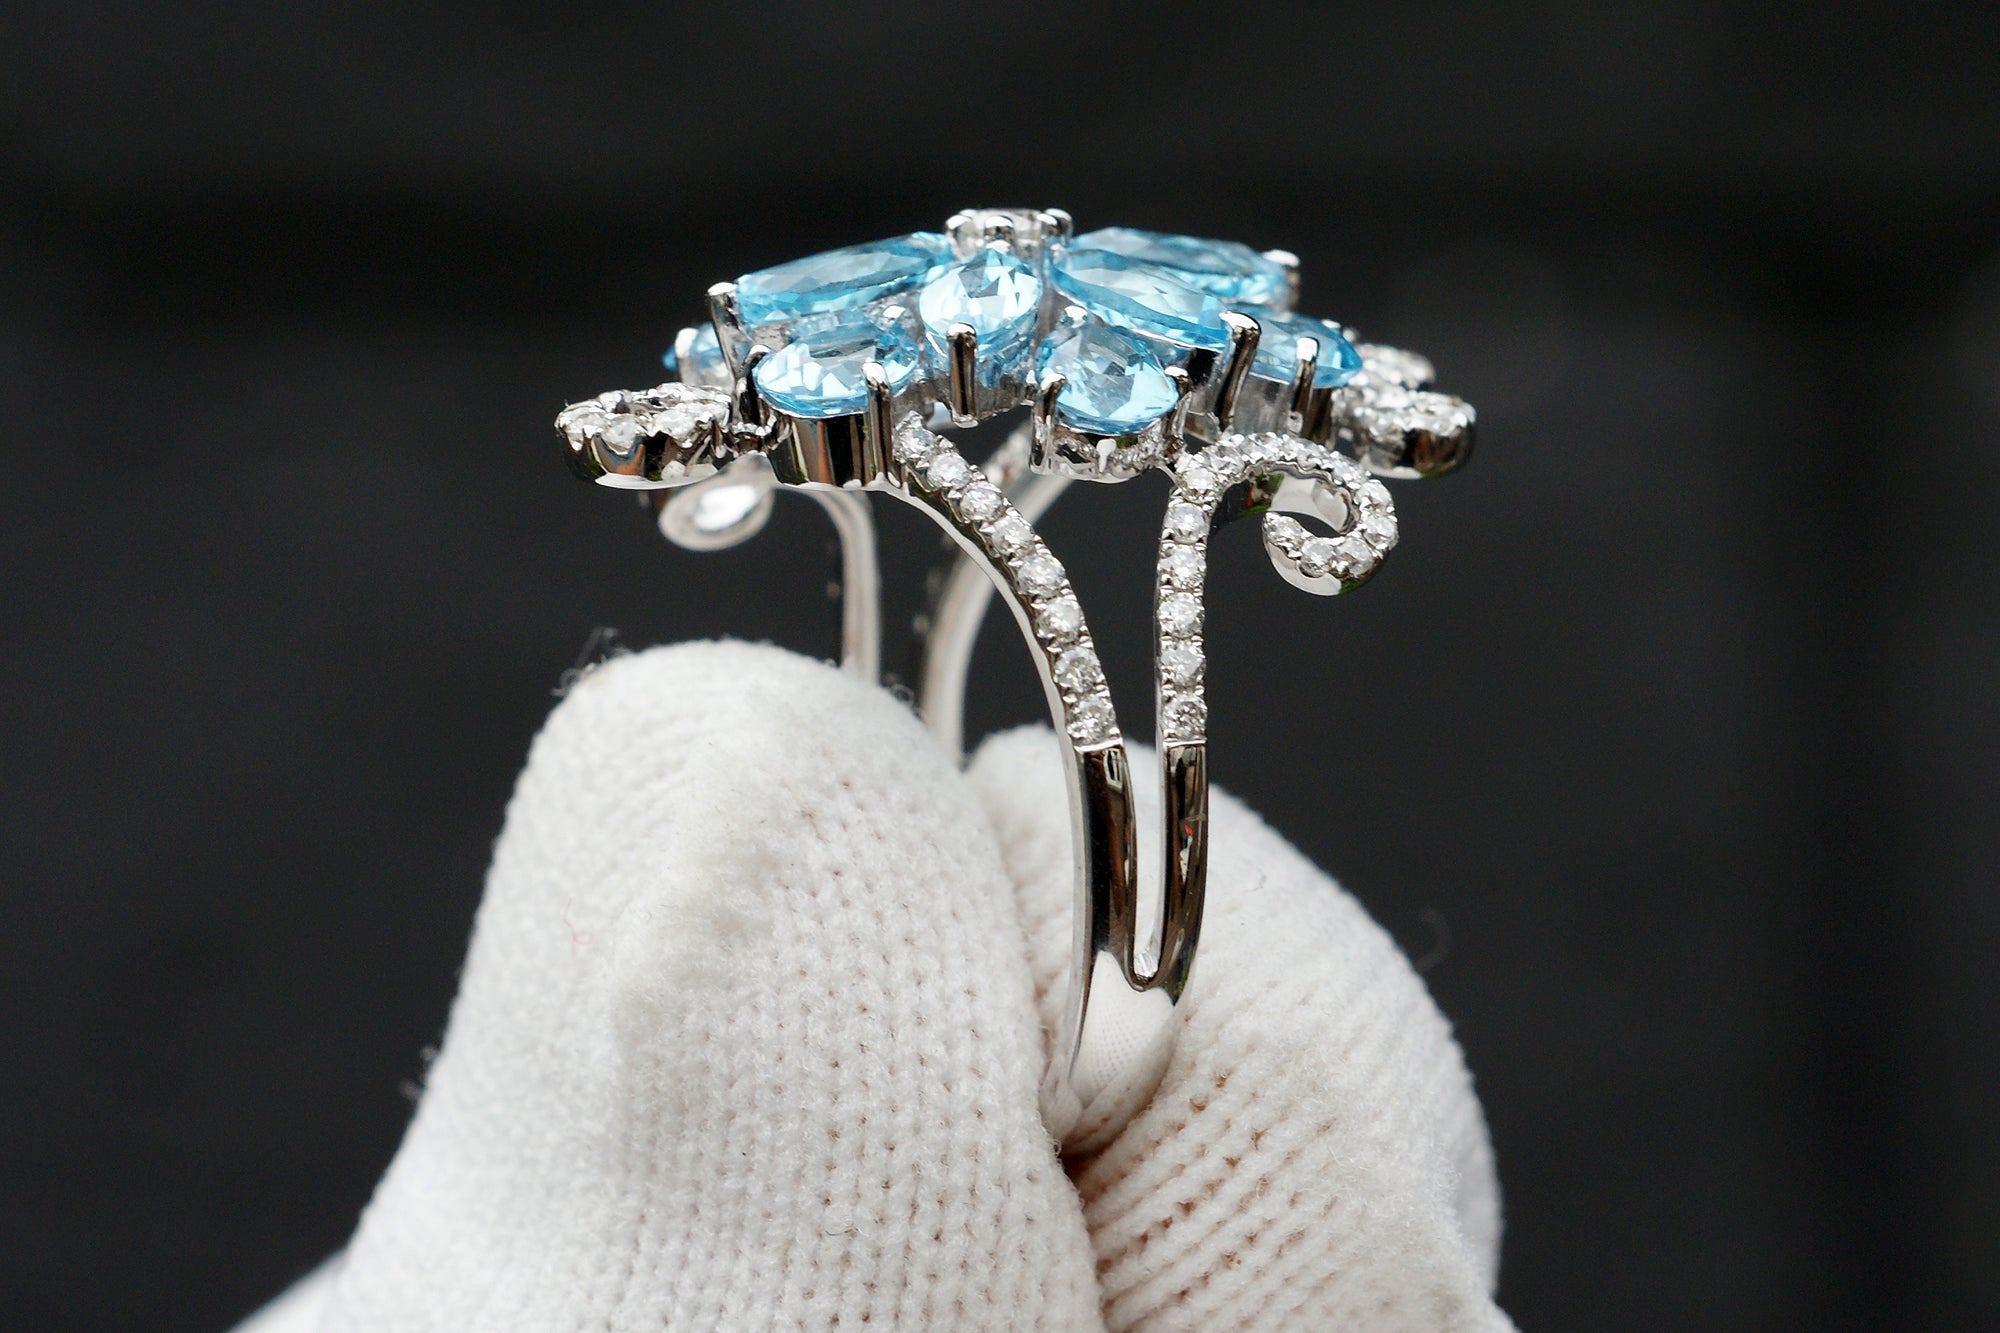 14k Gold London Blue Topaz Ring - Ilse Luxe | Linjer Jewelry